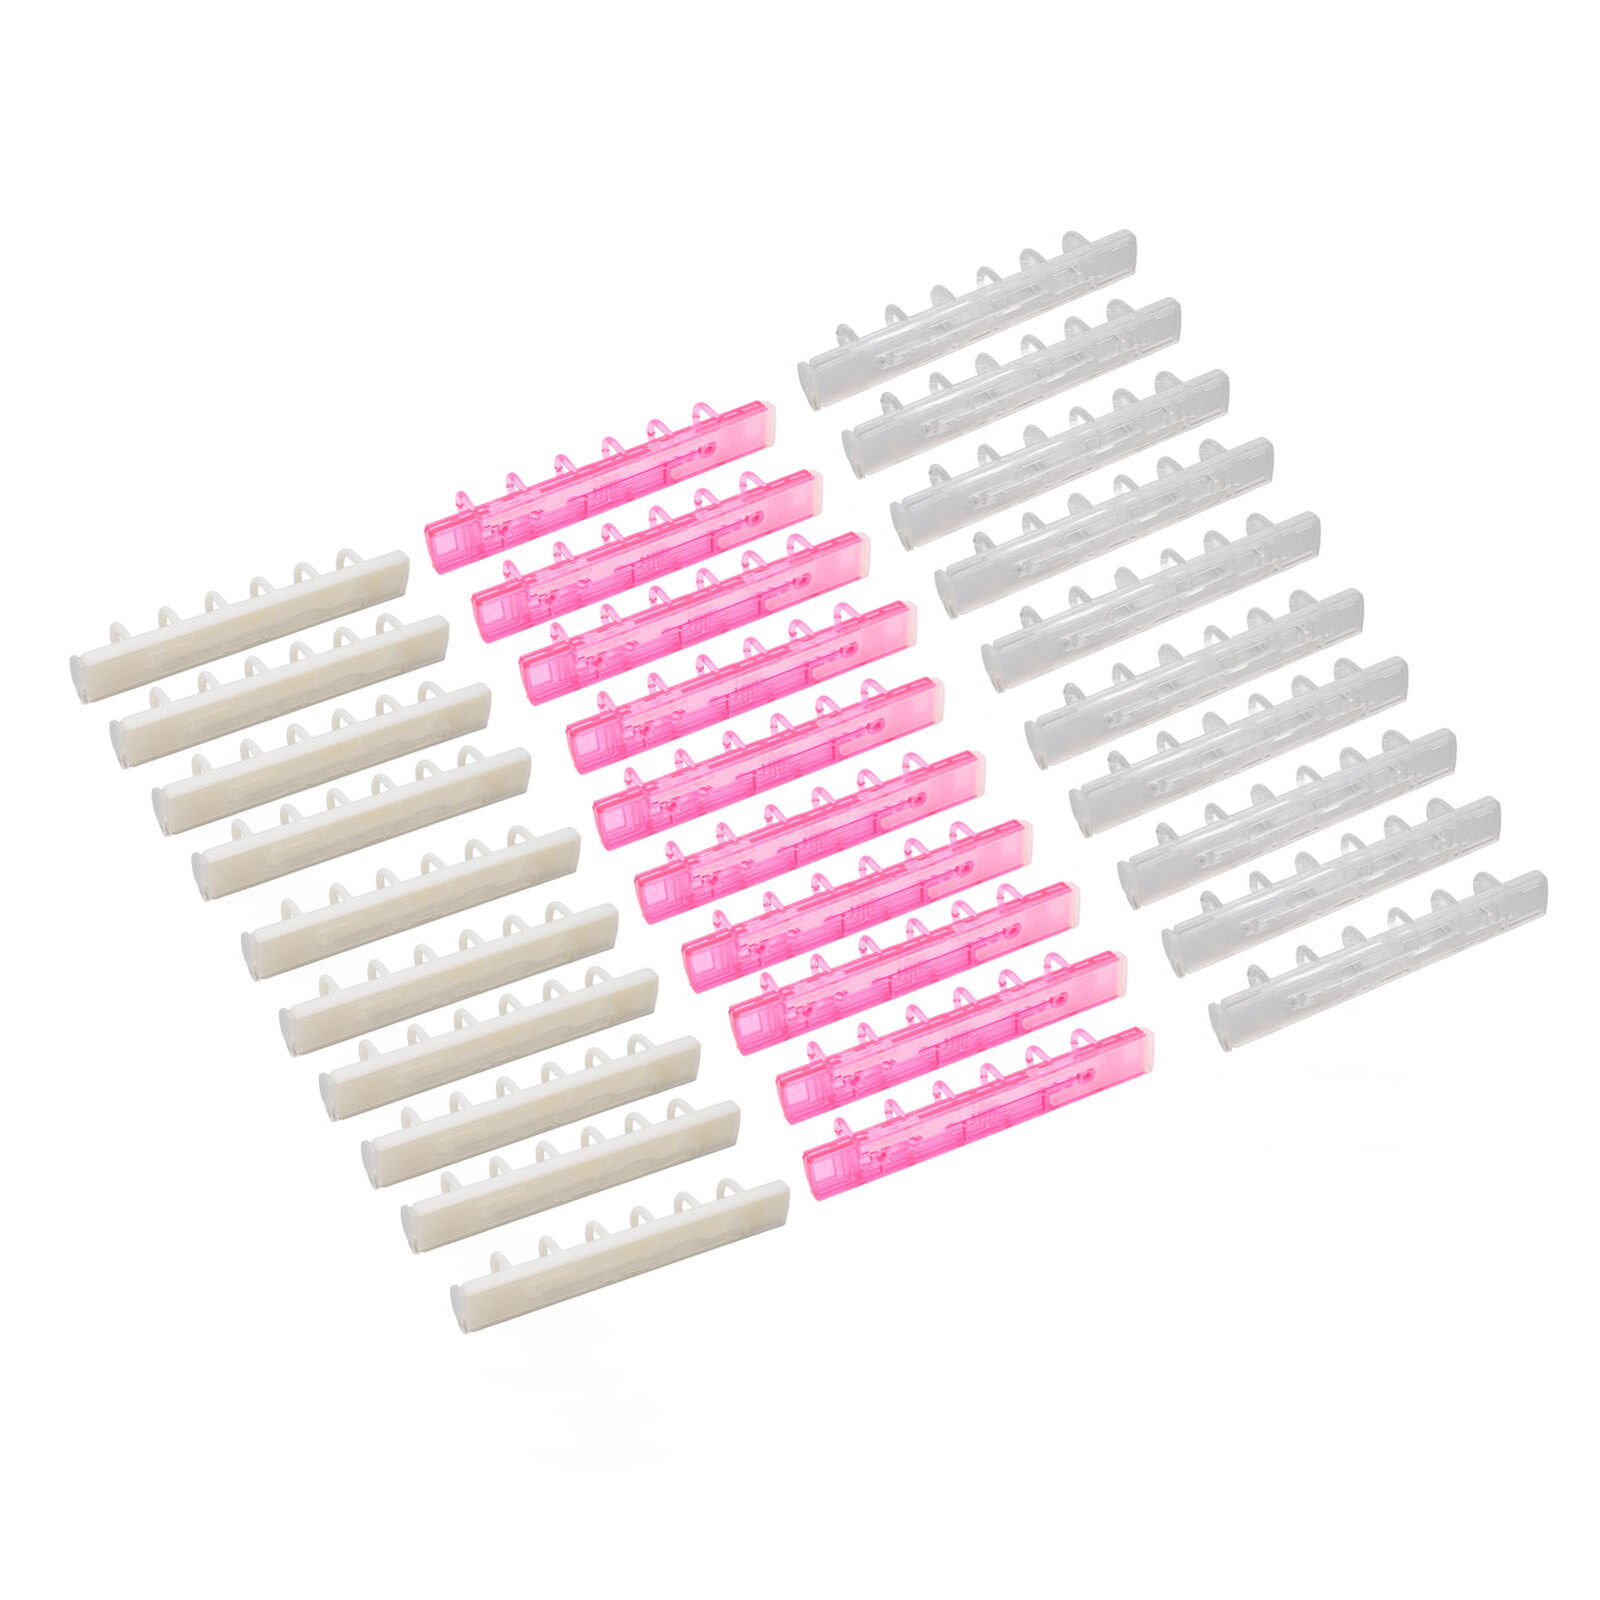 10pcs Binding Combs 6 Holes Binder Rings For Student Document Notebook Making